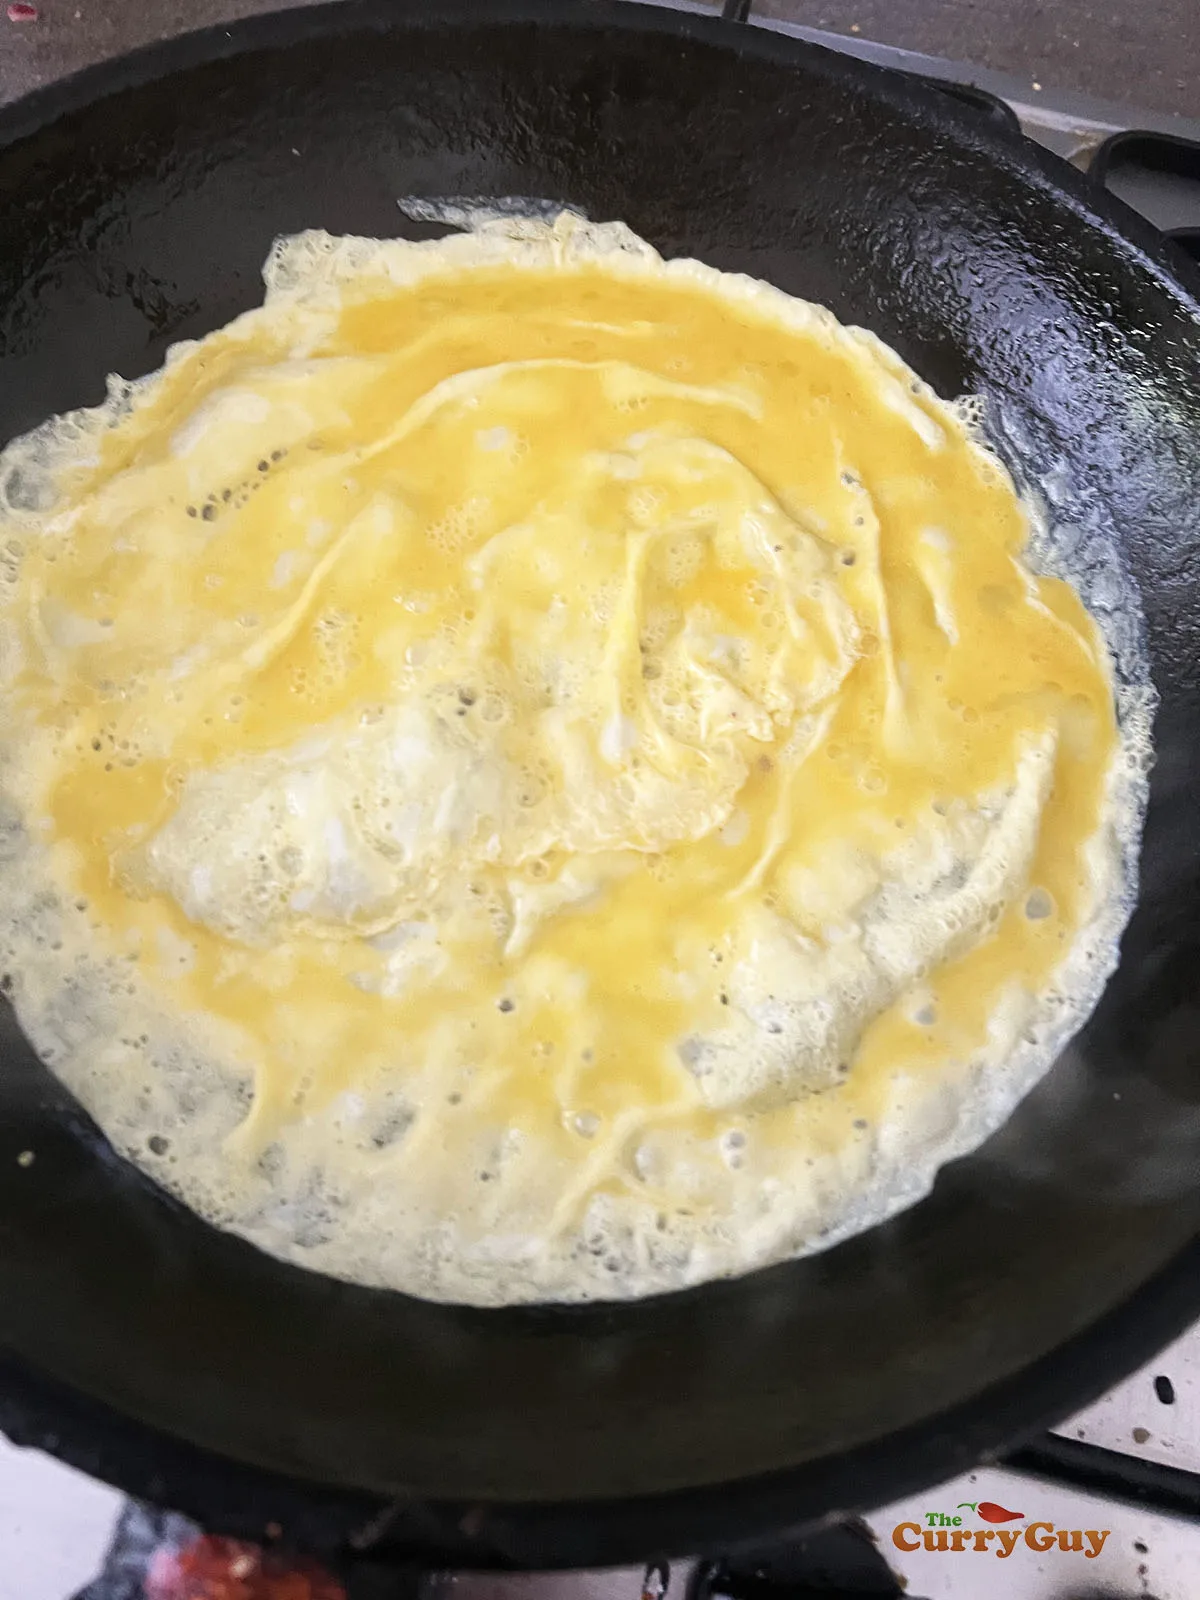 Egg cooking in a pan.